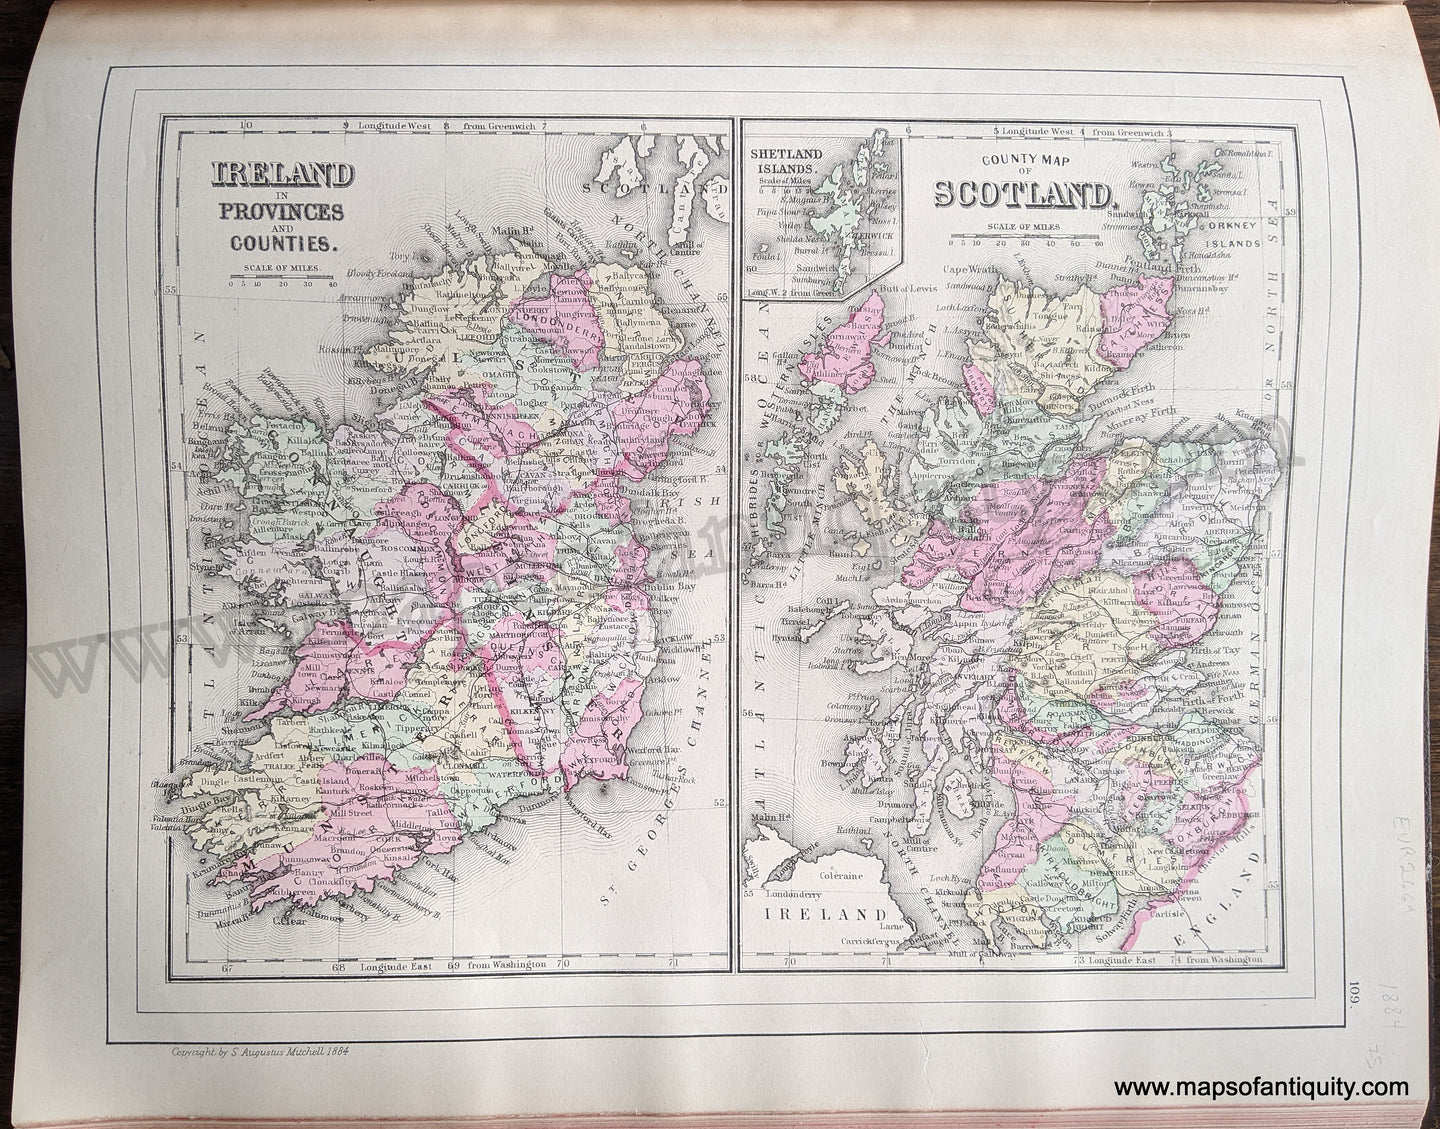 Antique-Hand-Colored-Map-Ireland-in-Provinces-and-Counties-/-County-Map-of-Scotland-with-inset-of-Shetland-Islands.--Europe-Ireland-1884-Mitchell-Maps-Of-Antiquity-1800s-19th-century